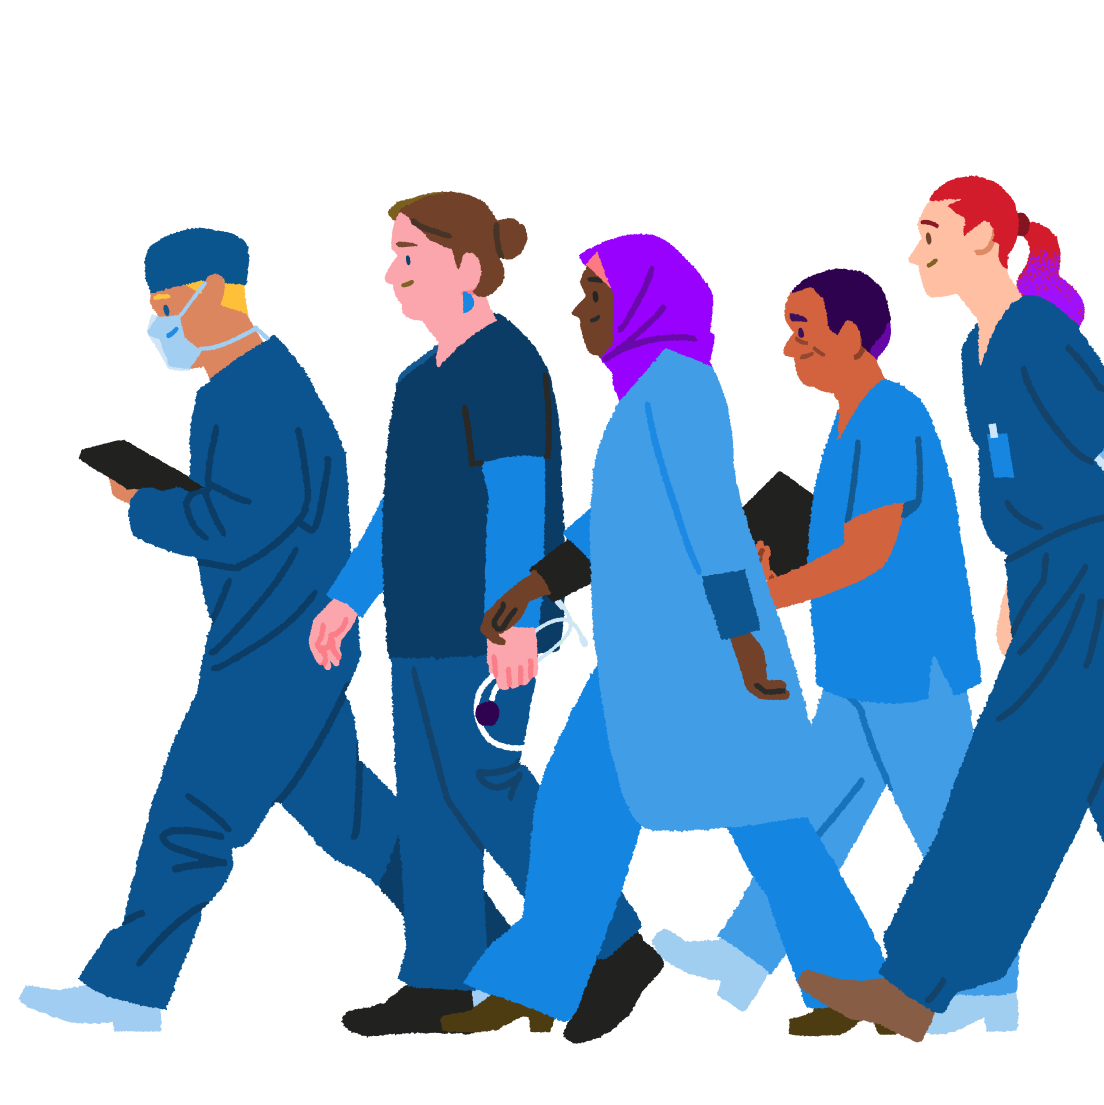 Group of medical professionals walking